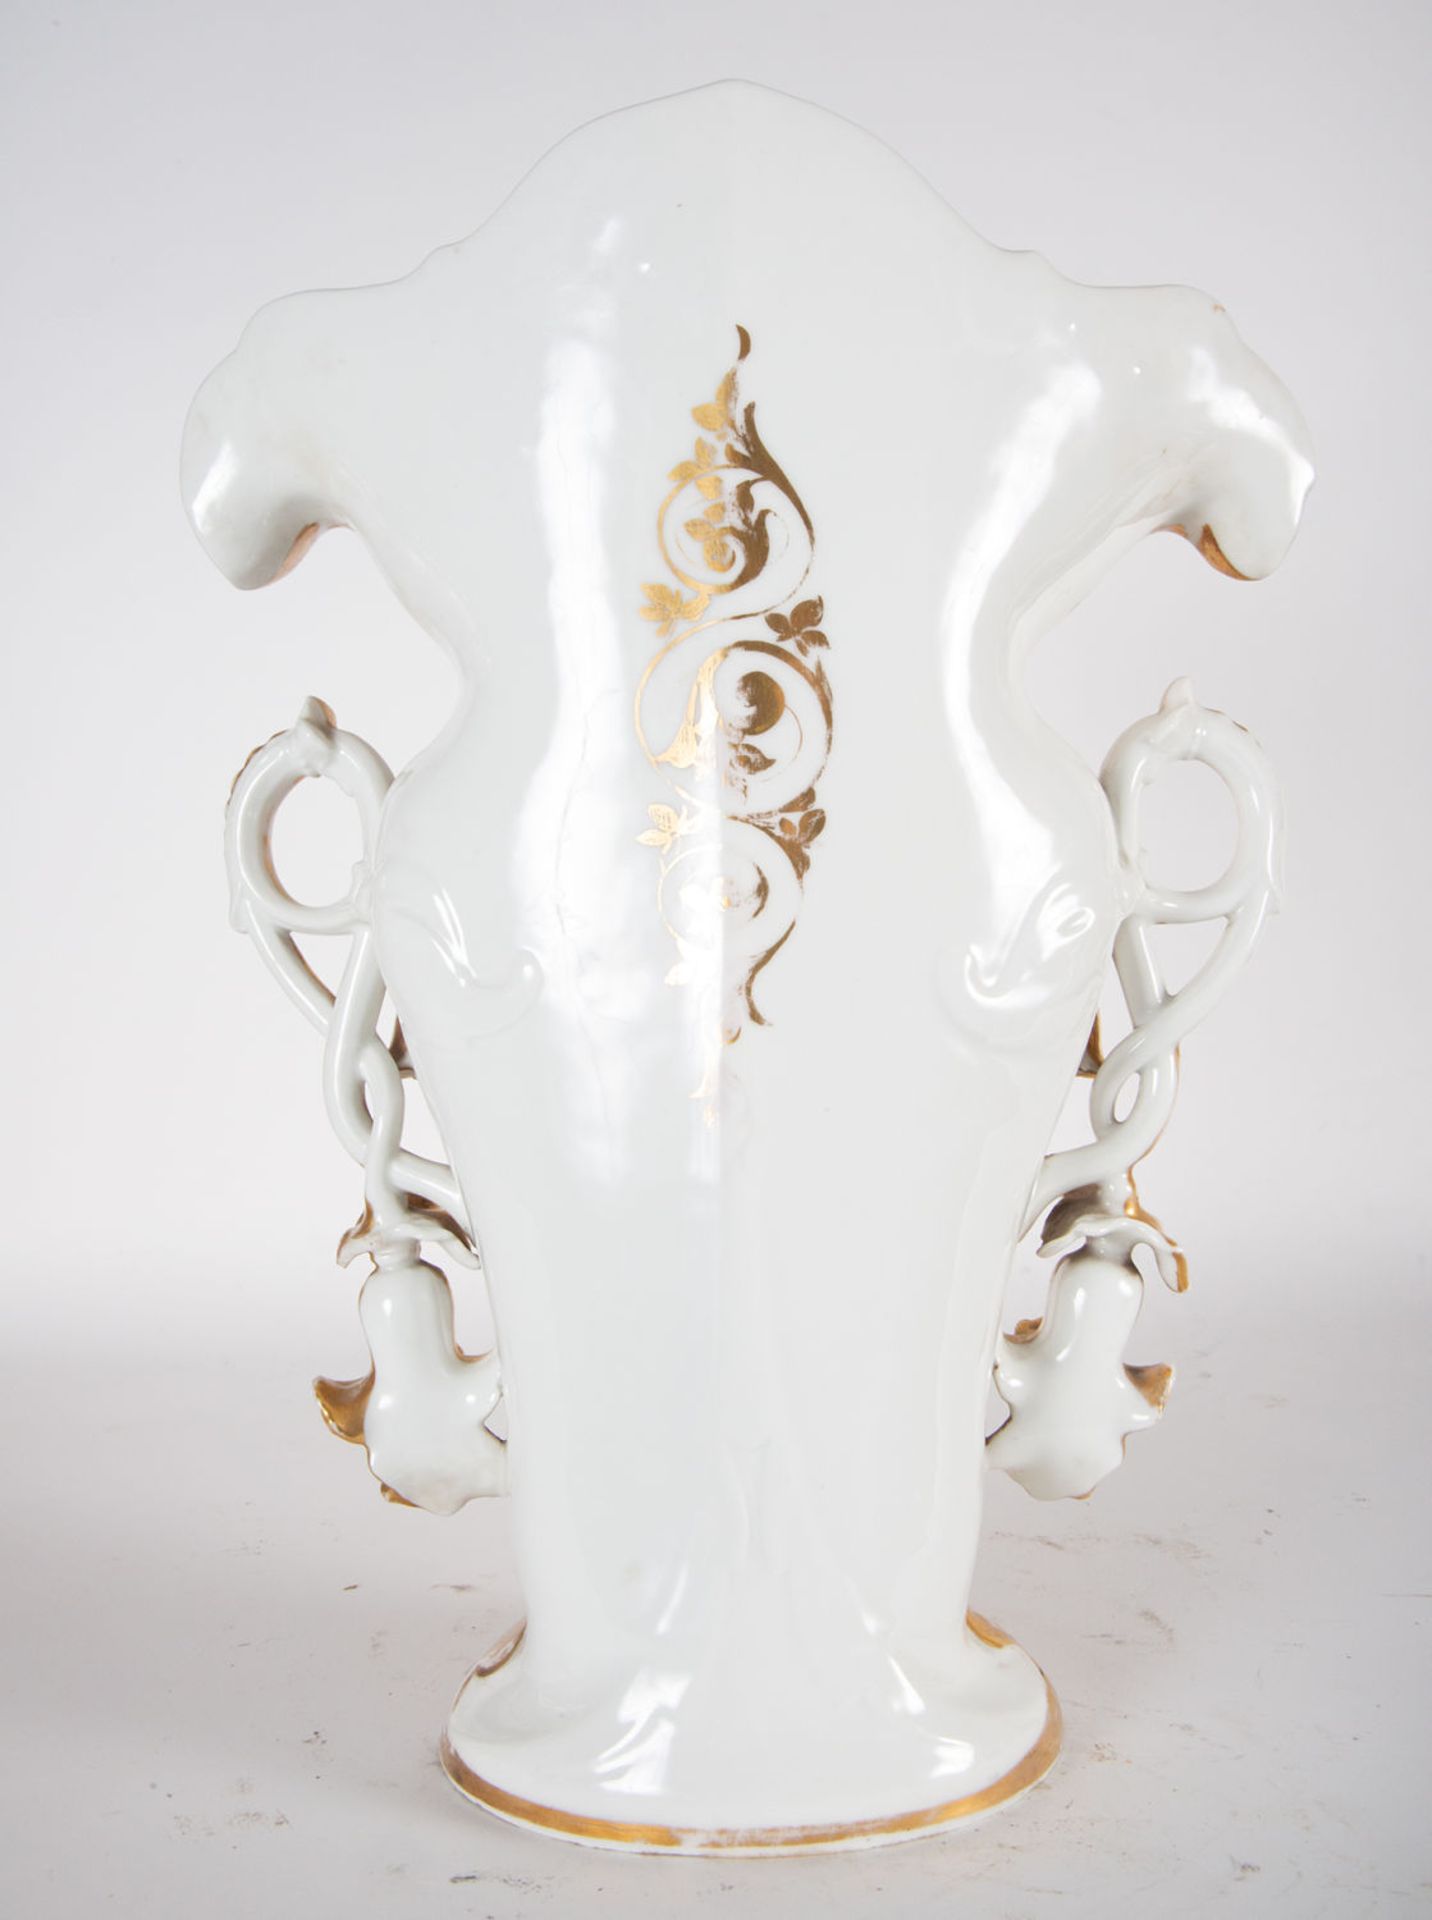 Pair of Elizabethan Vases in enameled and polychrome porcelain, 19th century - Image 5 of 10